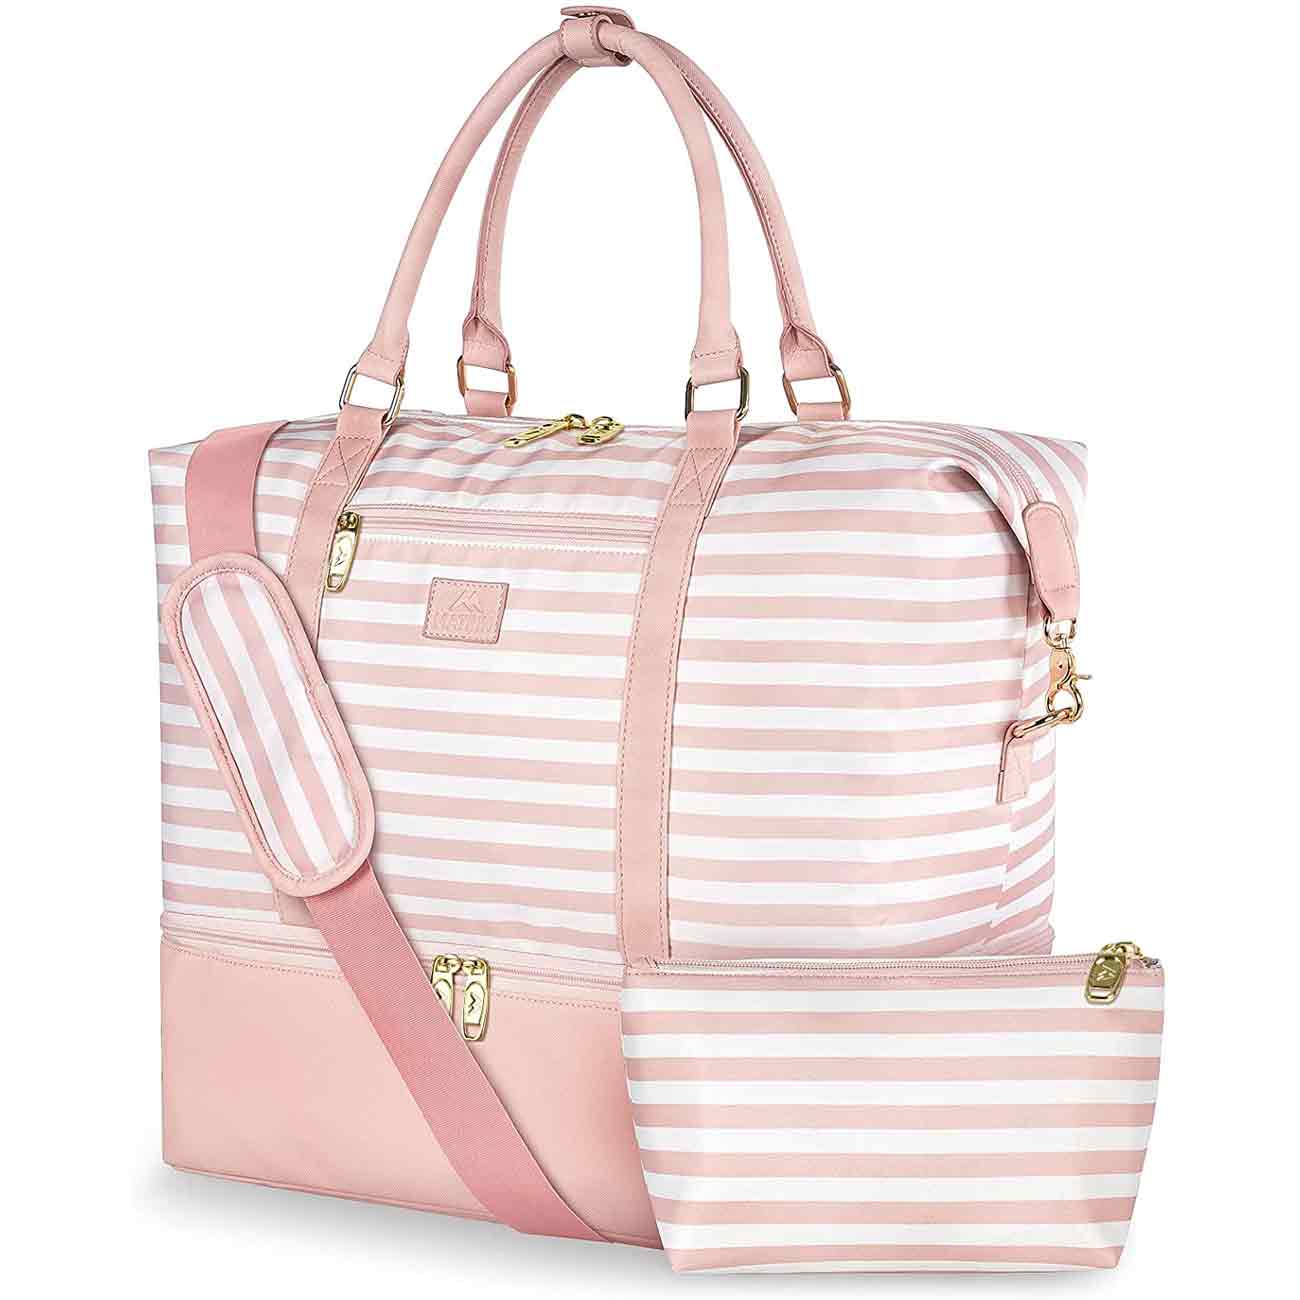 Women's Tote Bags - Pink